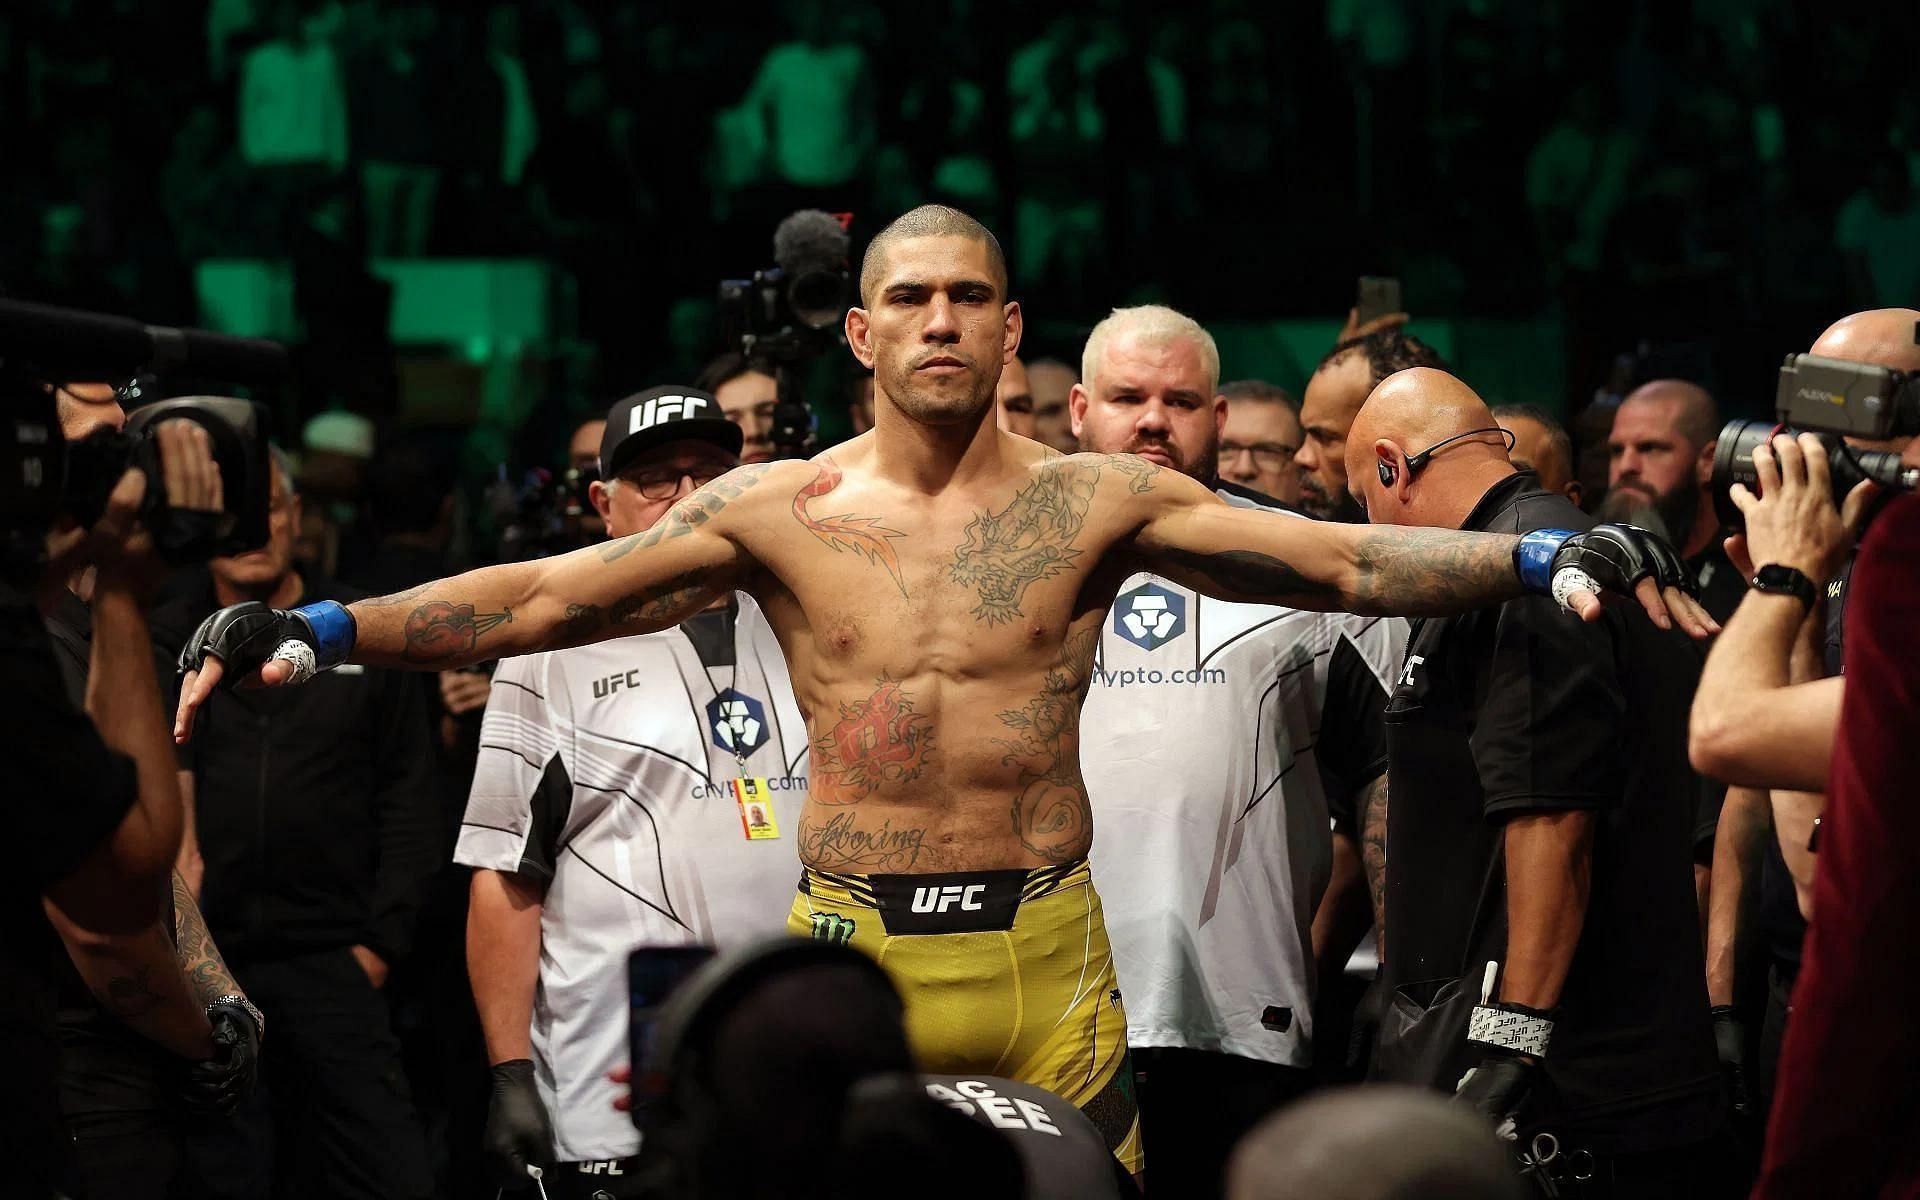 Pereira's Coach Reveals When The Fighter Intends To Return To The Octagon